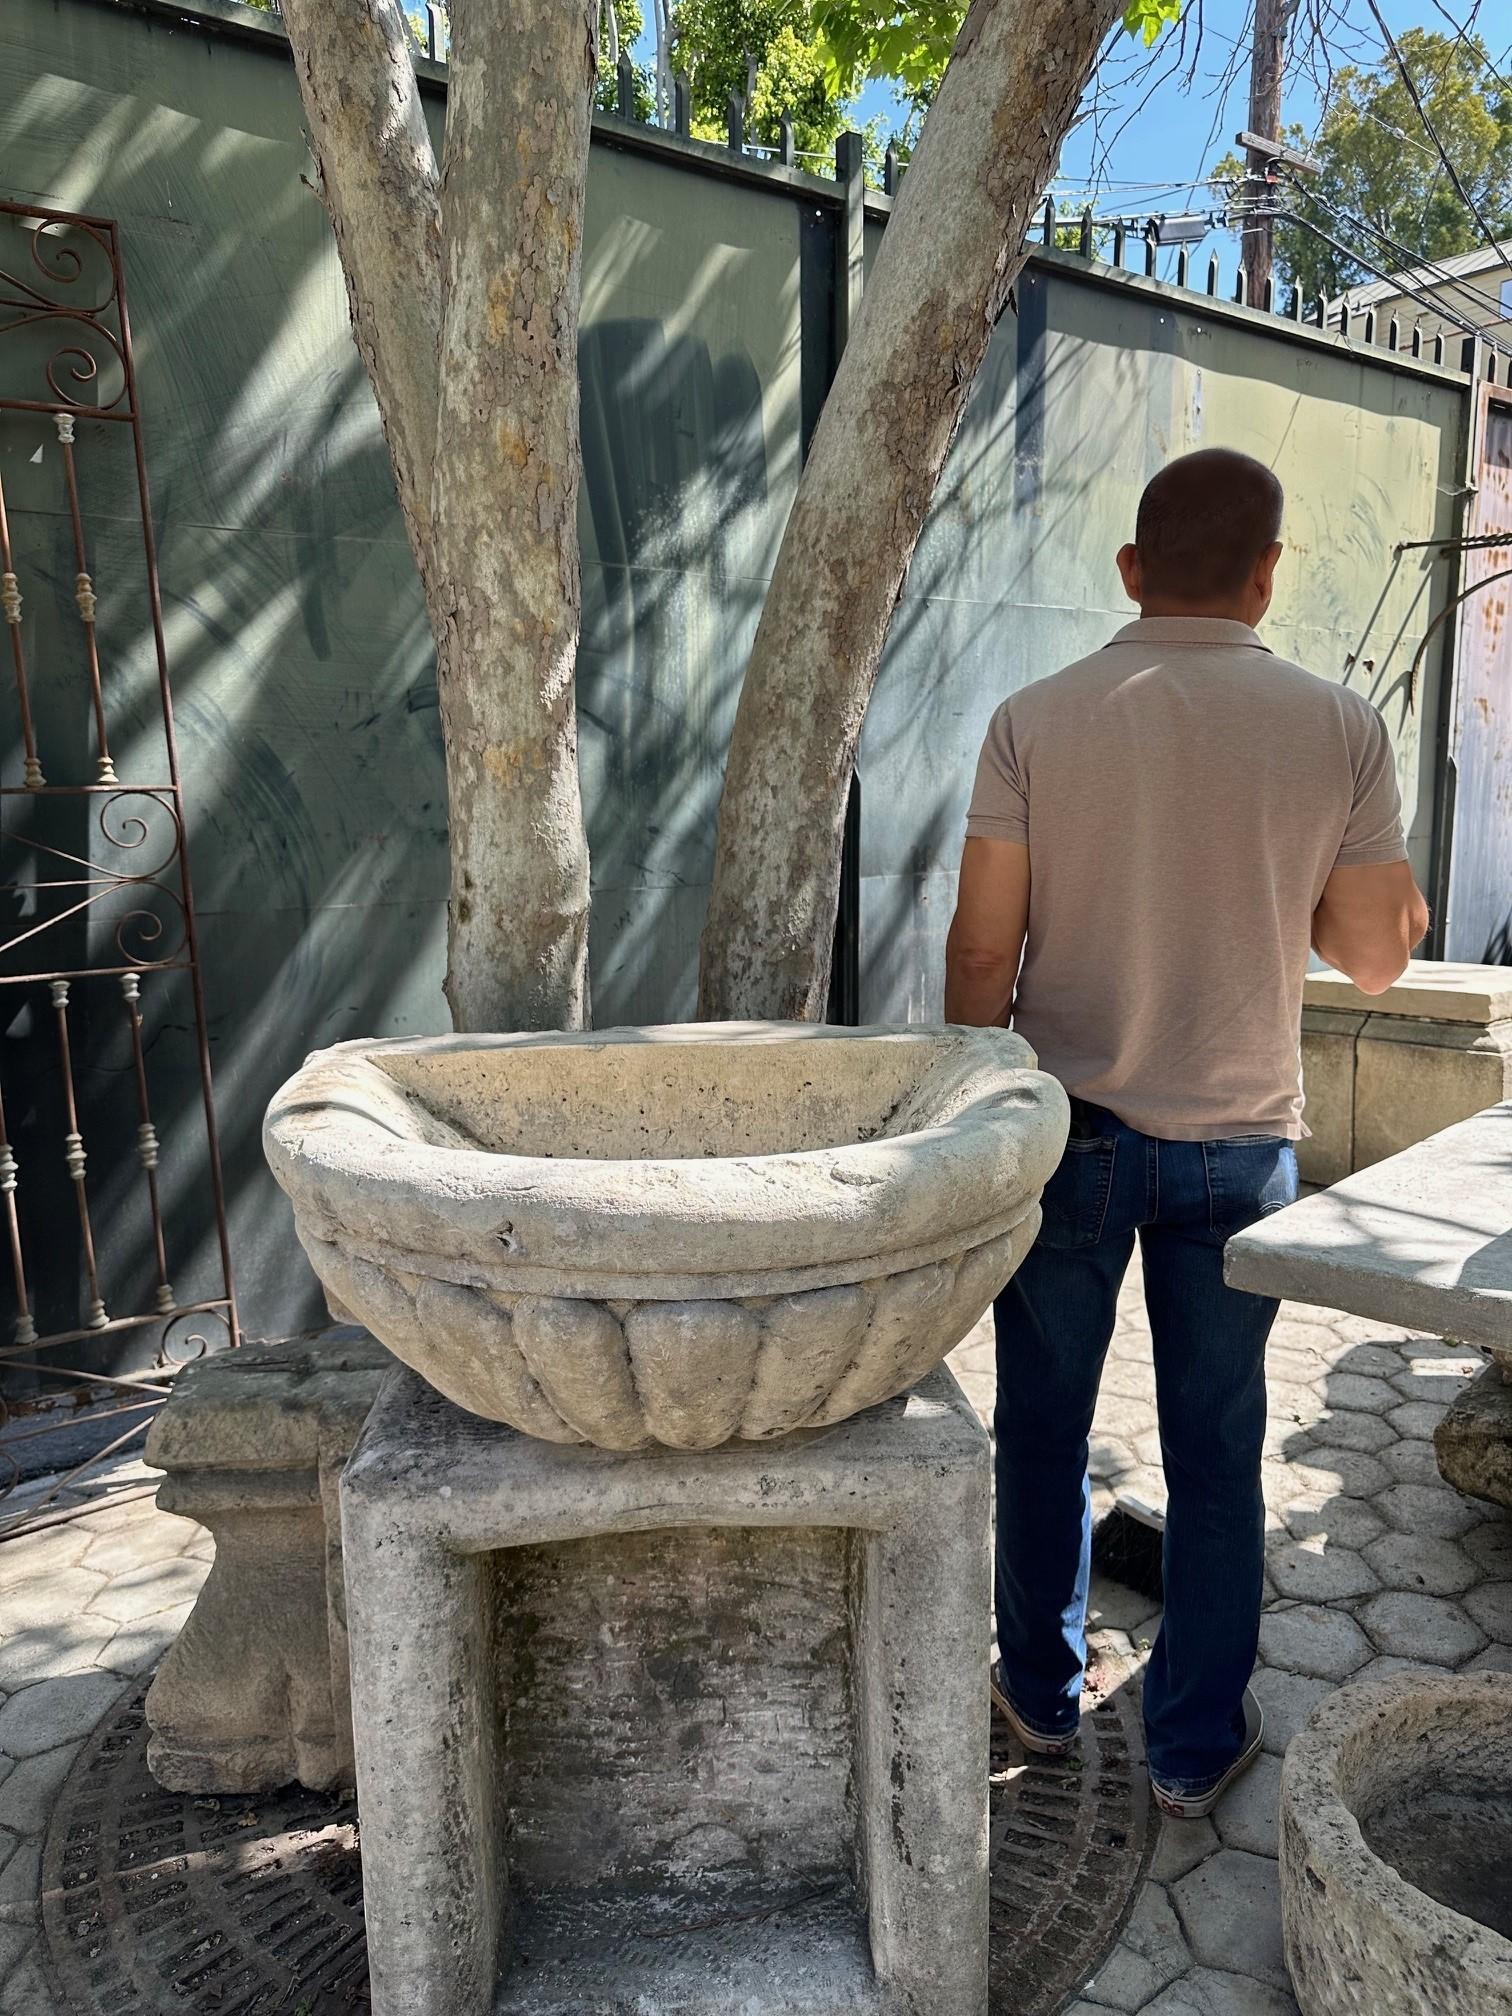 Antique Large Hand Carved Stone Sink Basin Wall Mount Fountain Bowl Farm Rustic. A Very Large 18th Century Hand Carved Stone Sink / Wall mount fountain basin . versatile sculpted architectural element for an outdoor Garden or indoor setting , See